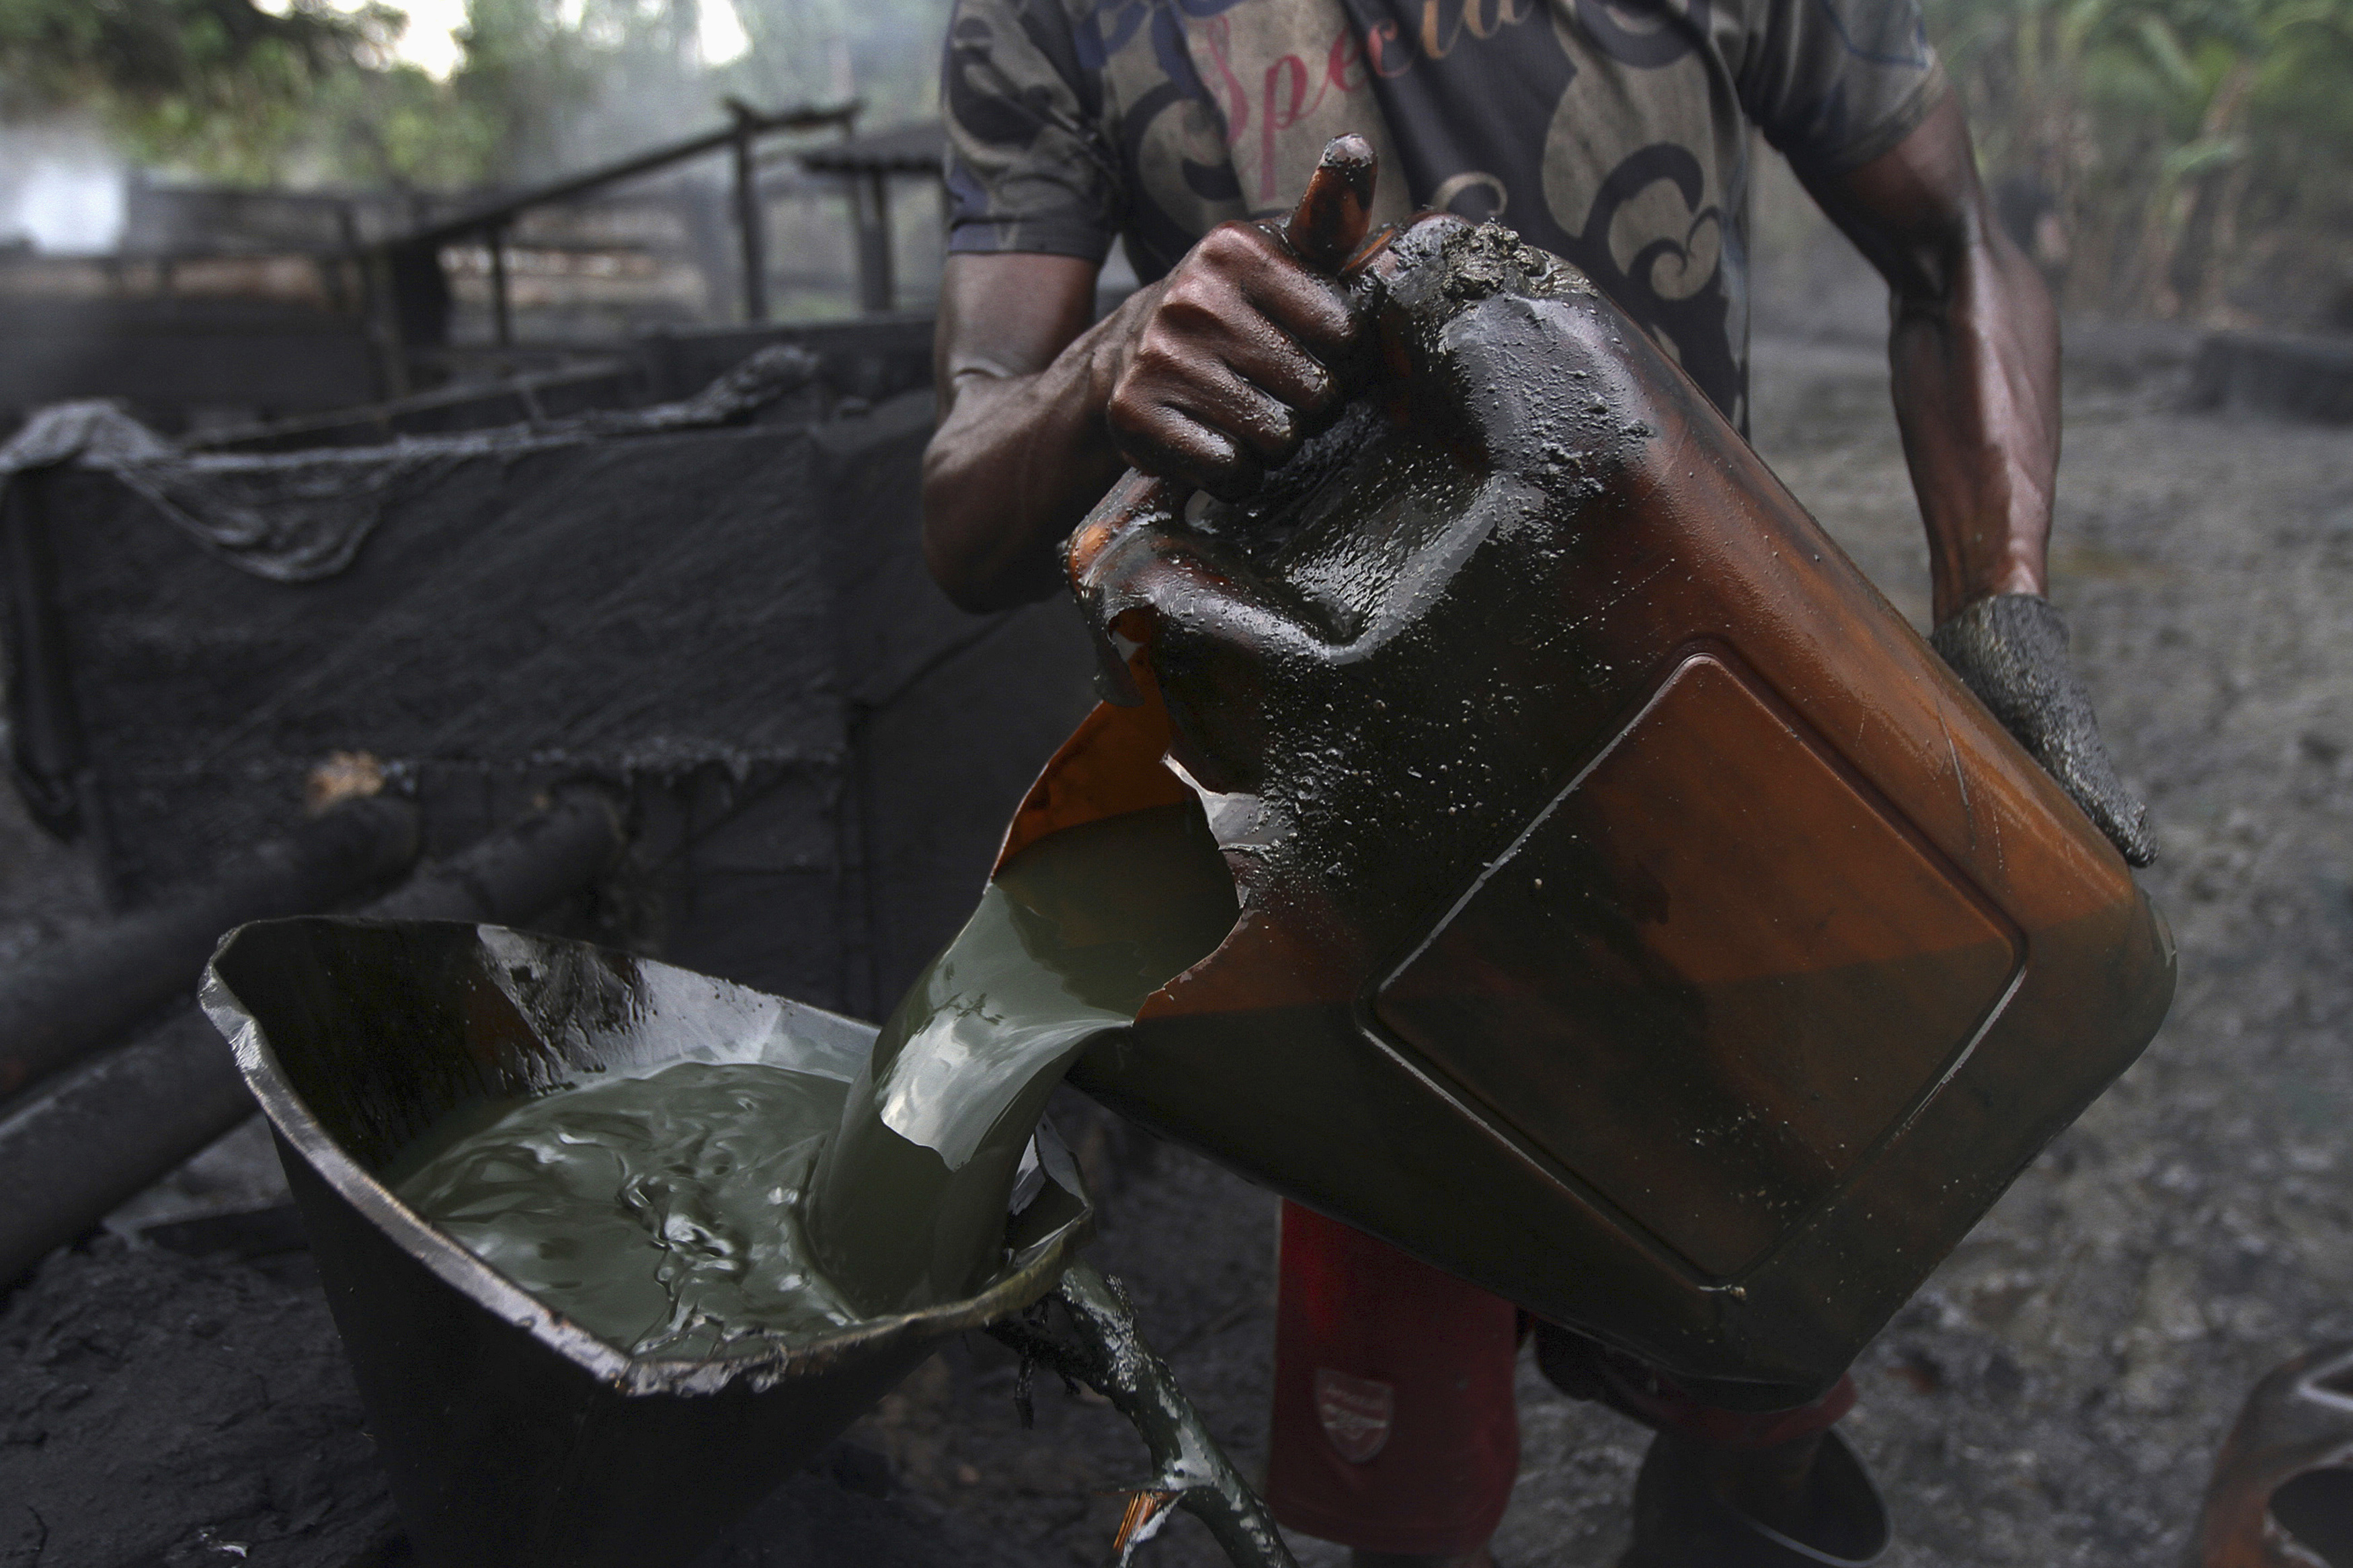 A worker pours crude oil into a locally made burner using a funnel at an illegal oil refinery site